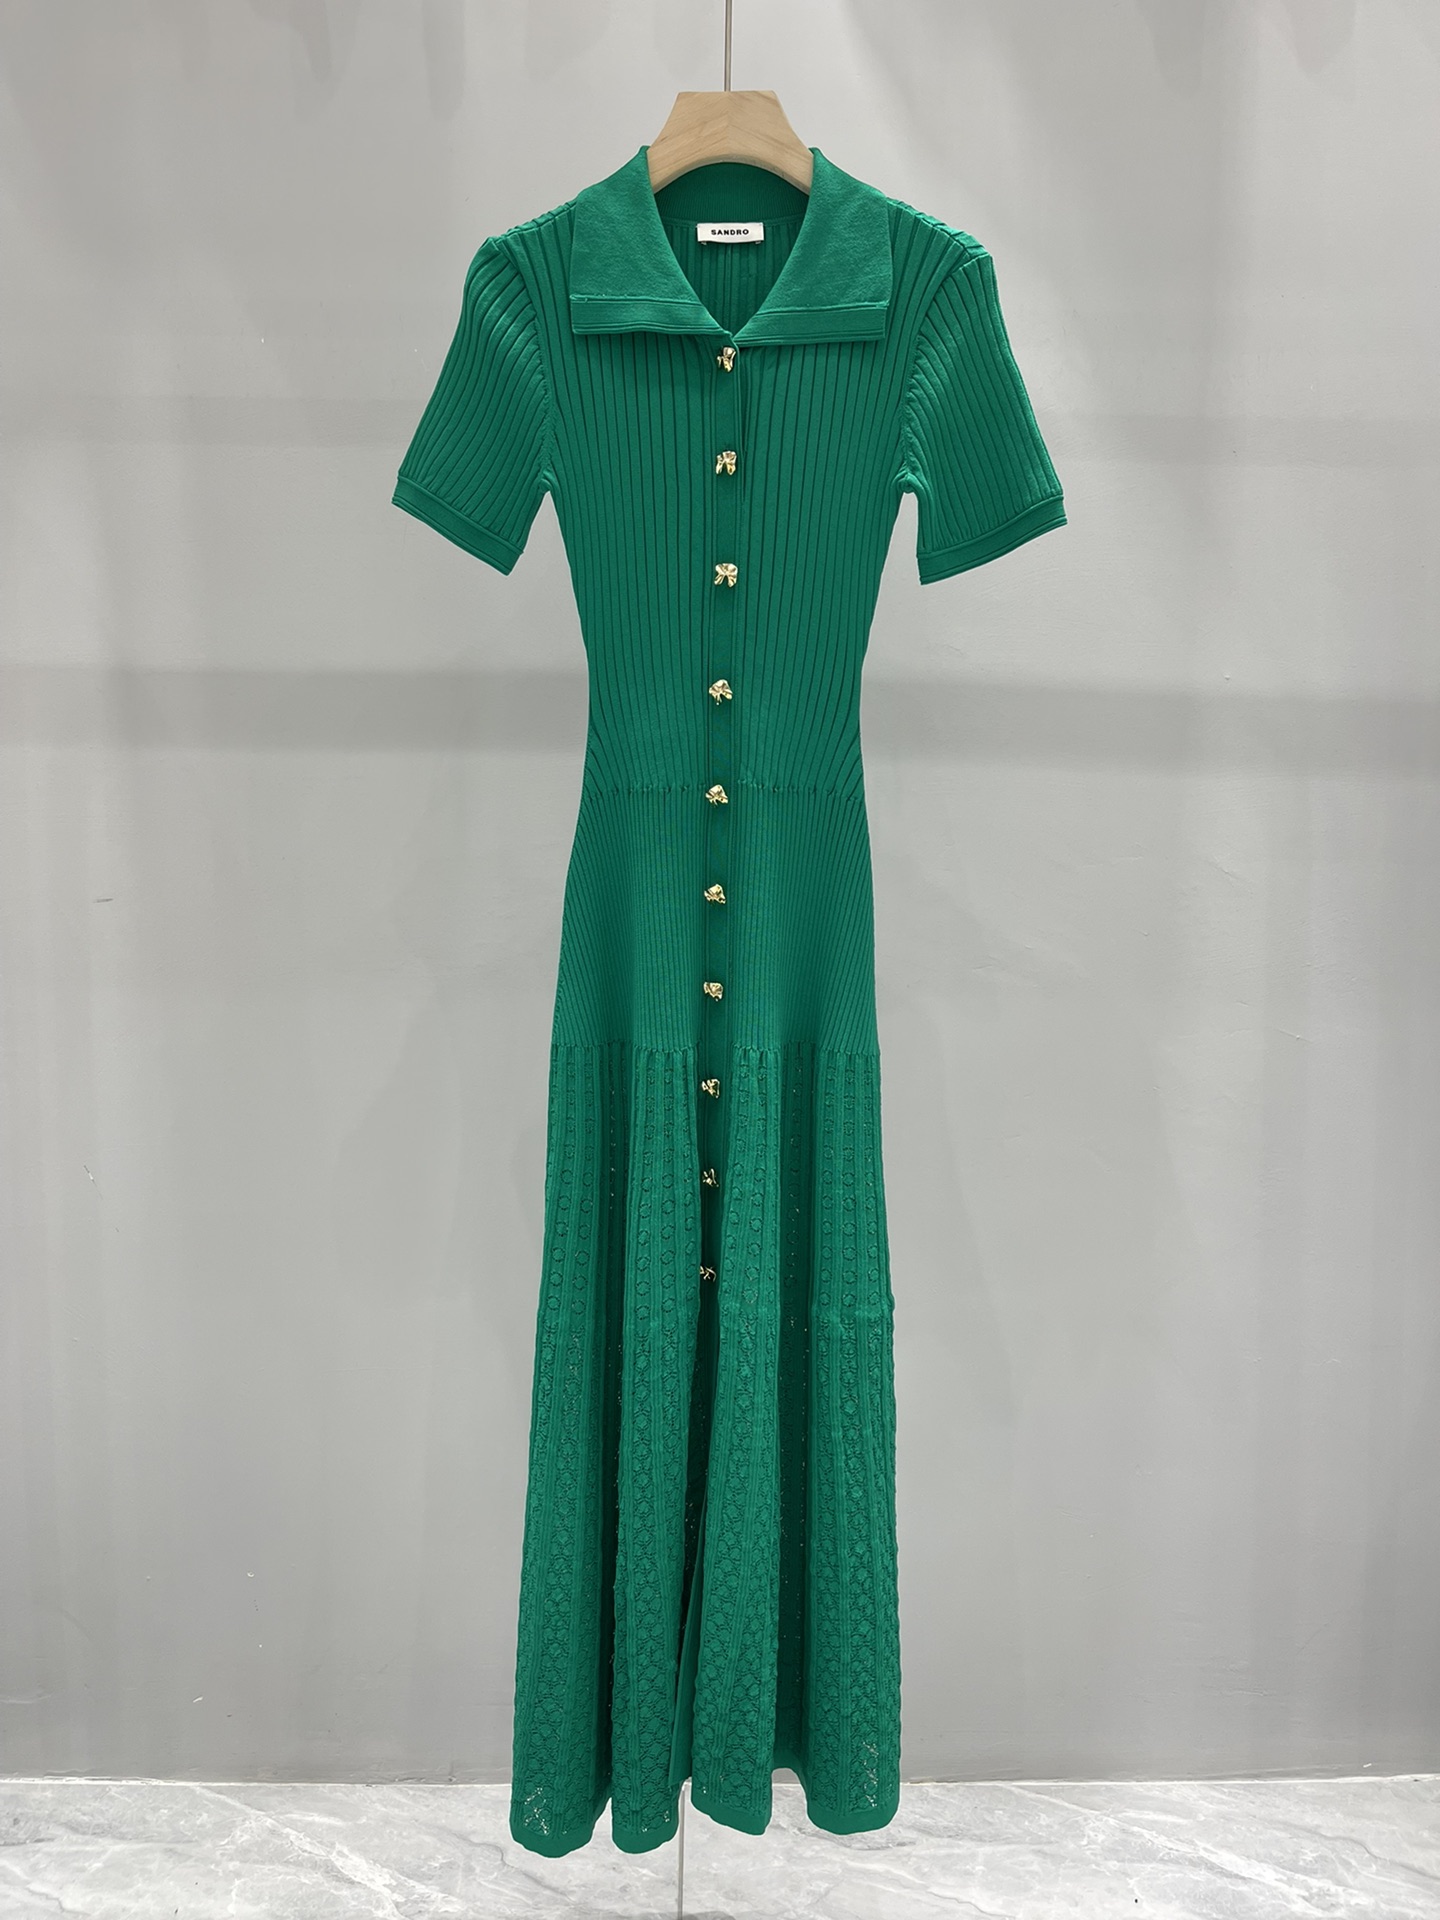 Clothing Dresses Green Knitting Spring Collection